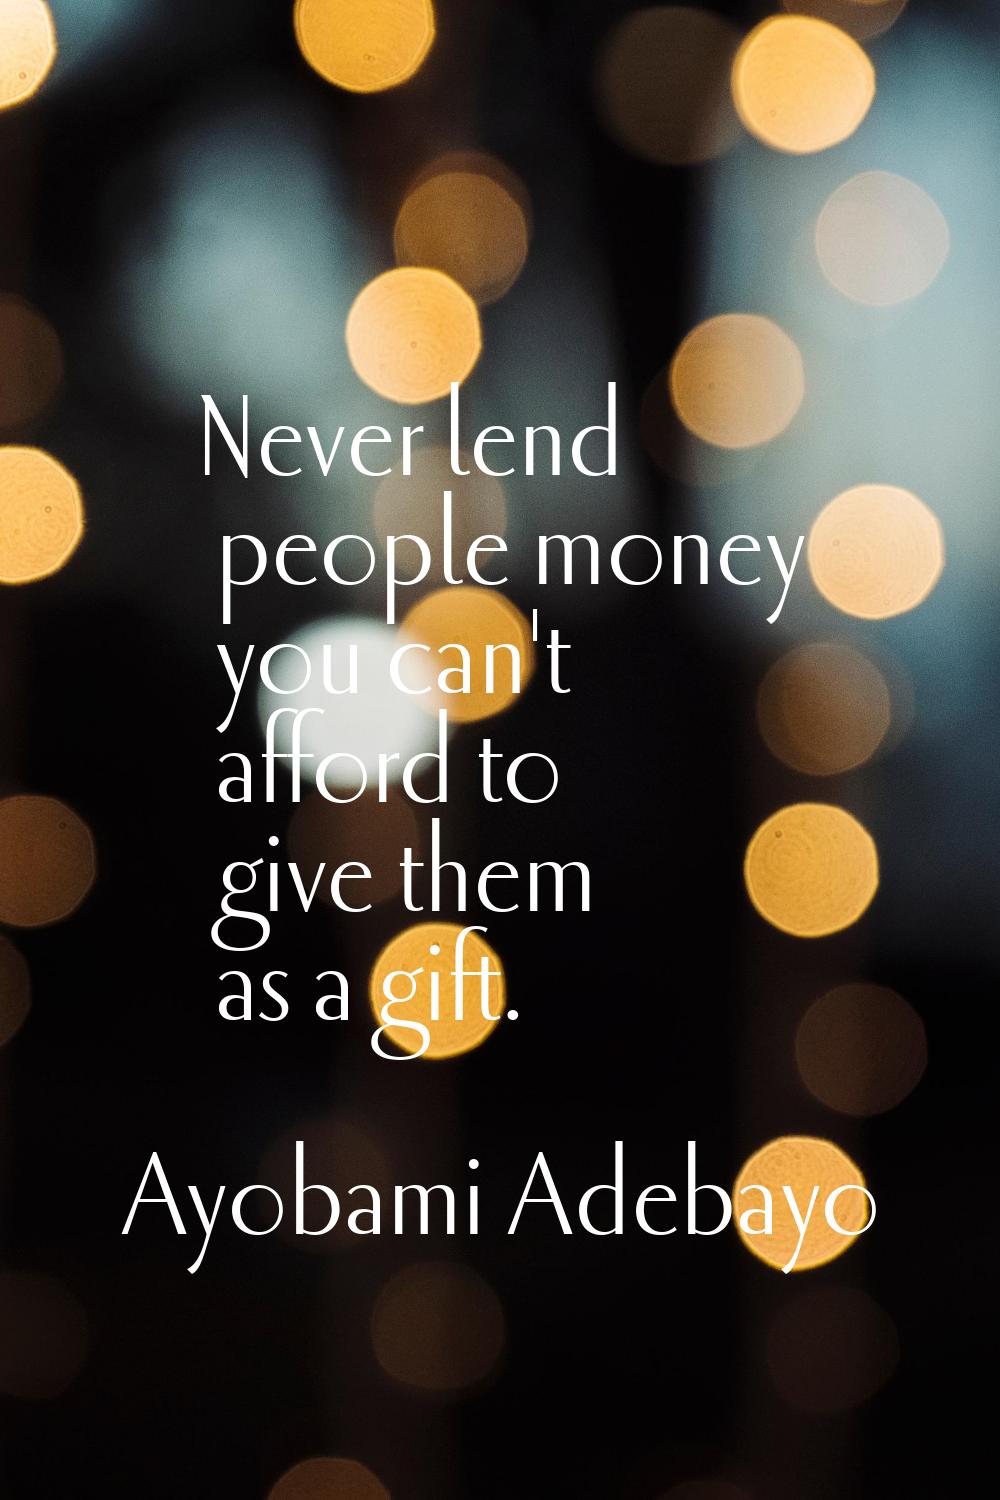 Never lend people money you can't afford to give them as a gift.